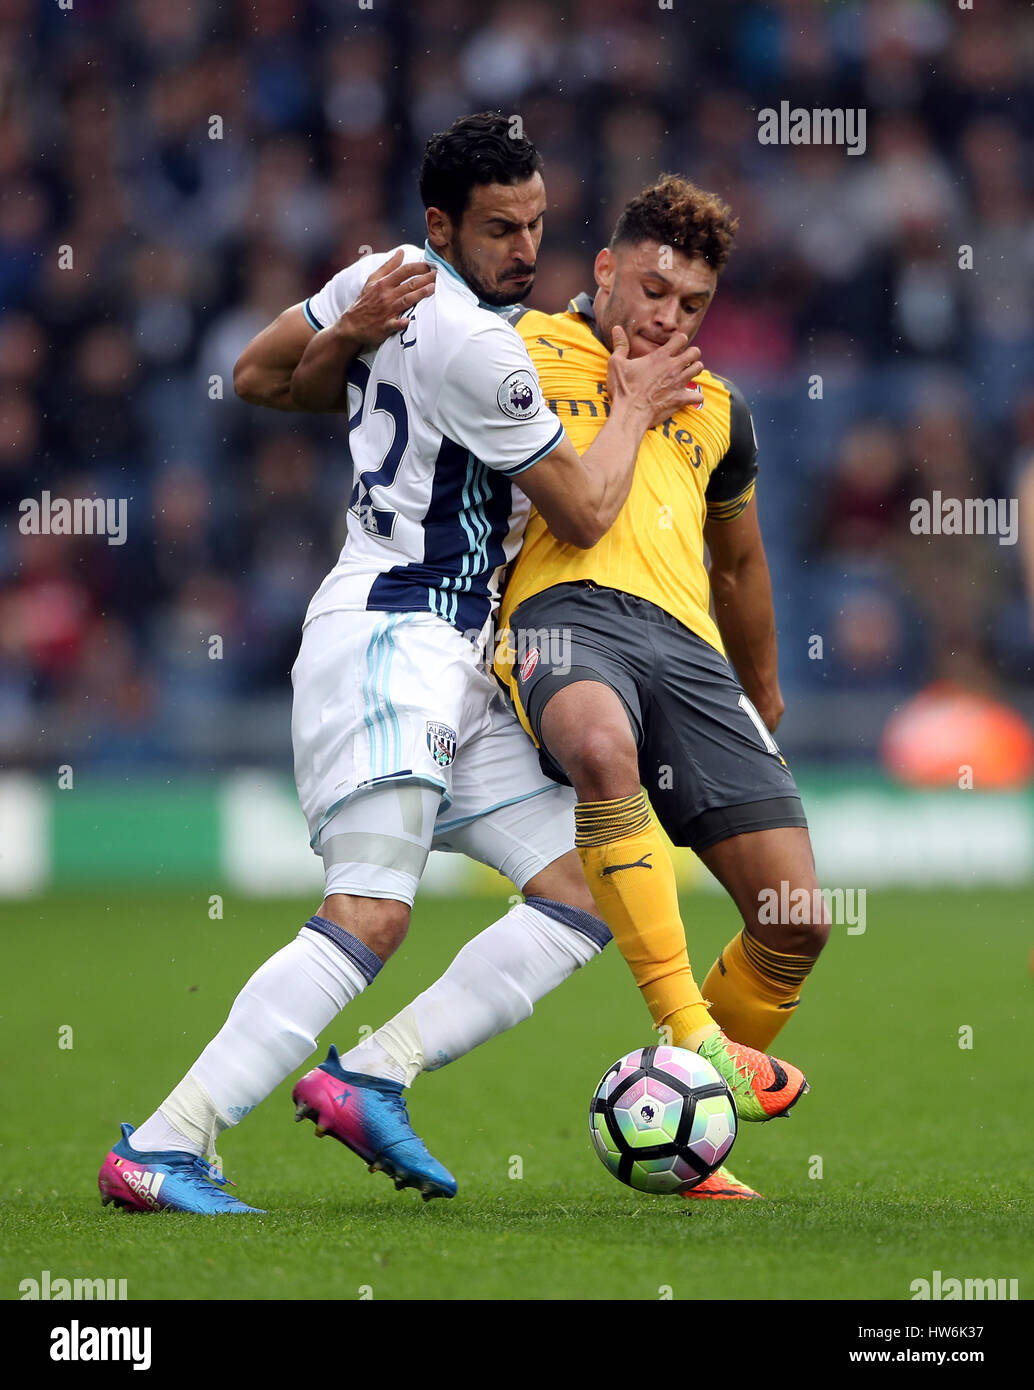 West Bromwich Albion's Nacer Chadli (left) and Arsenal's Alex Oxlade-Chamberlain battle for the ball during the Premier League match at The Hawthorns, West Bromwich. Stock Photo